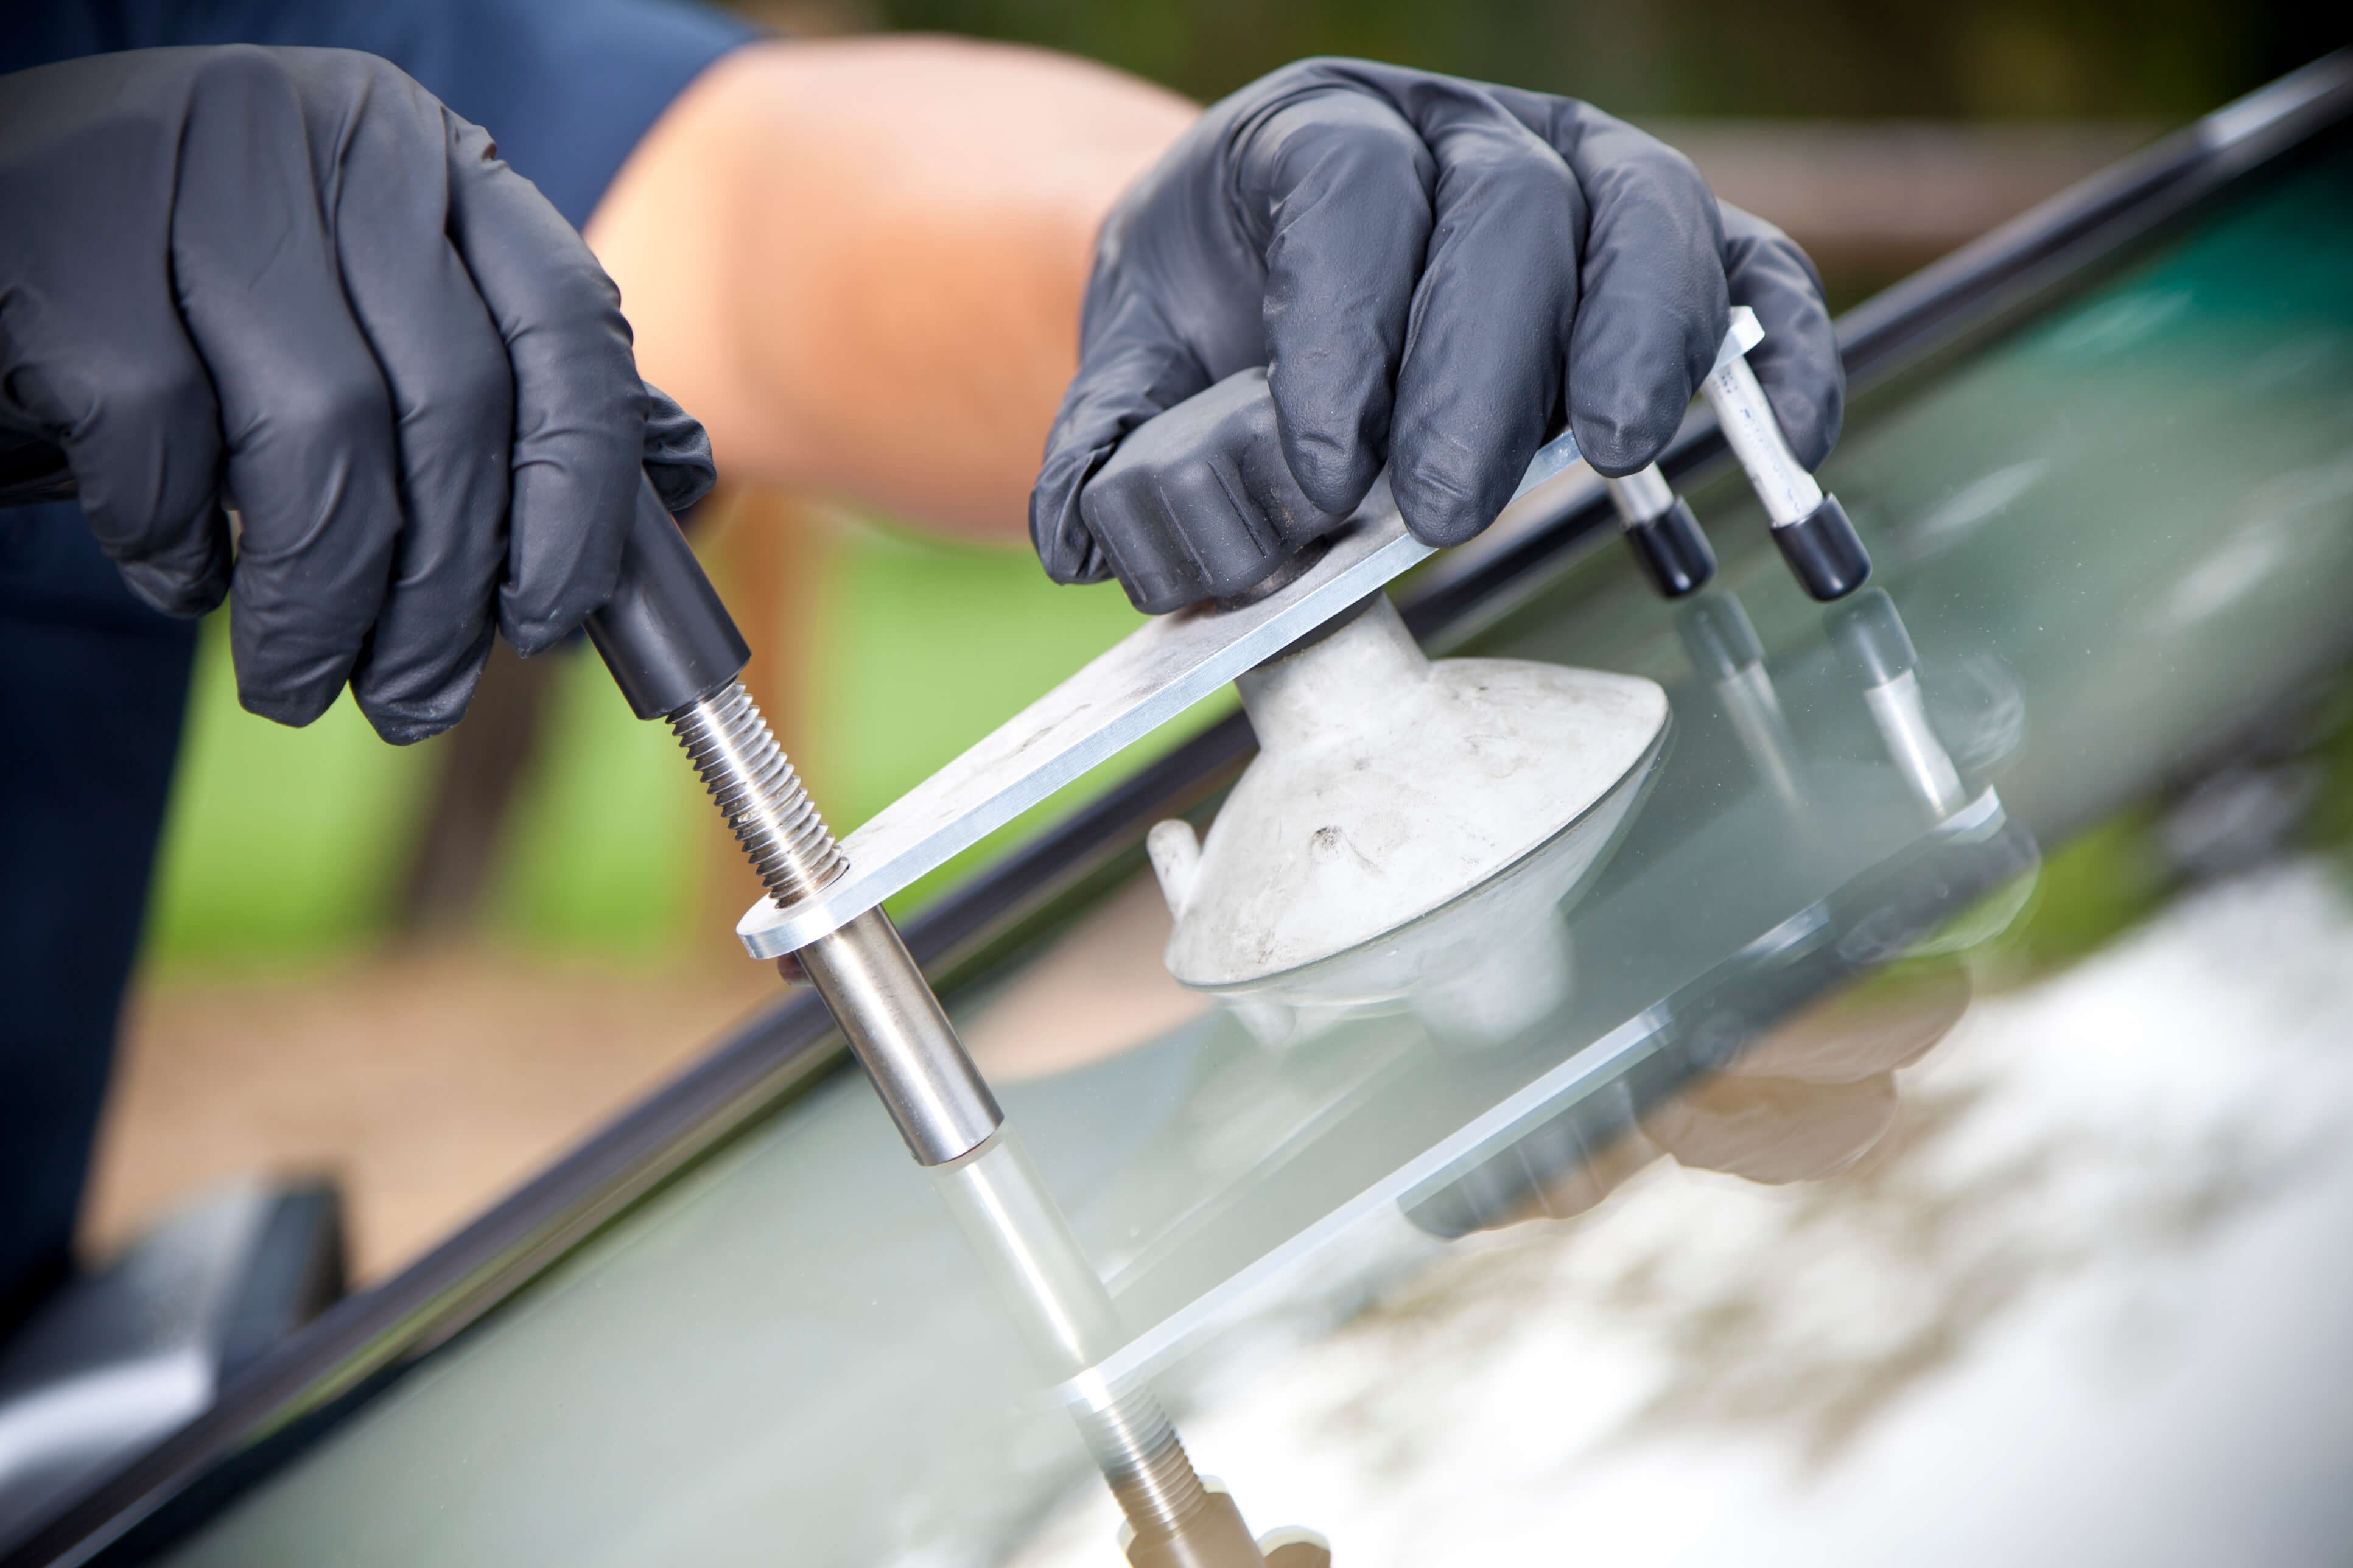 Windshield Repair Mississauga - In N Out Car Wash How Much Is It For A Windshield Repair